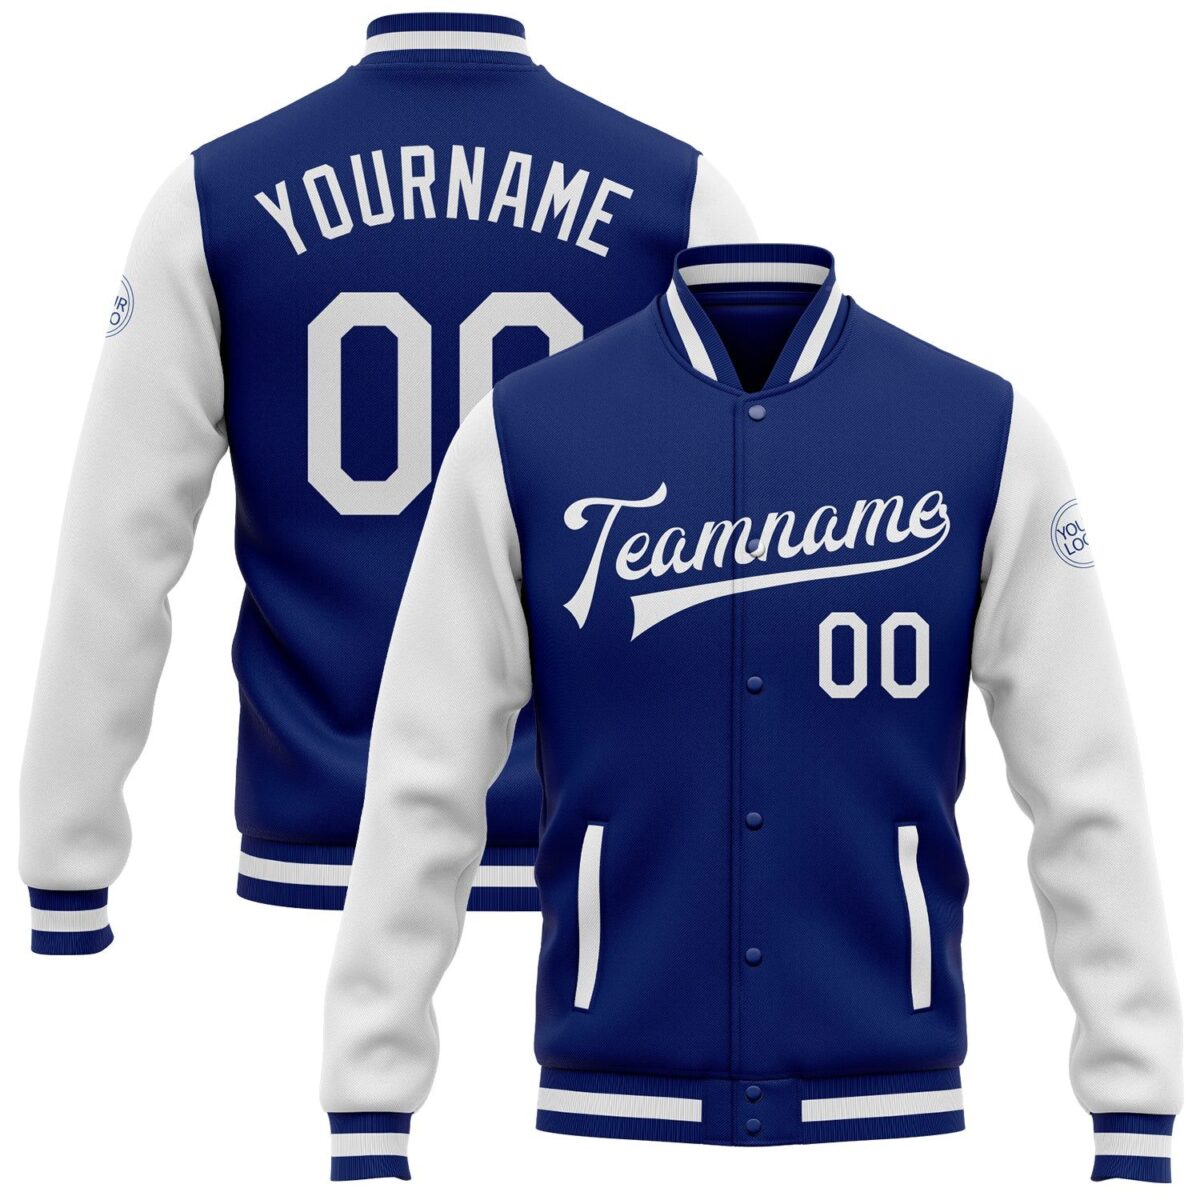 Baseball College Sports Jackets with Royal & White 1